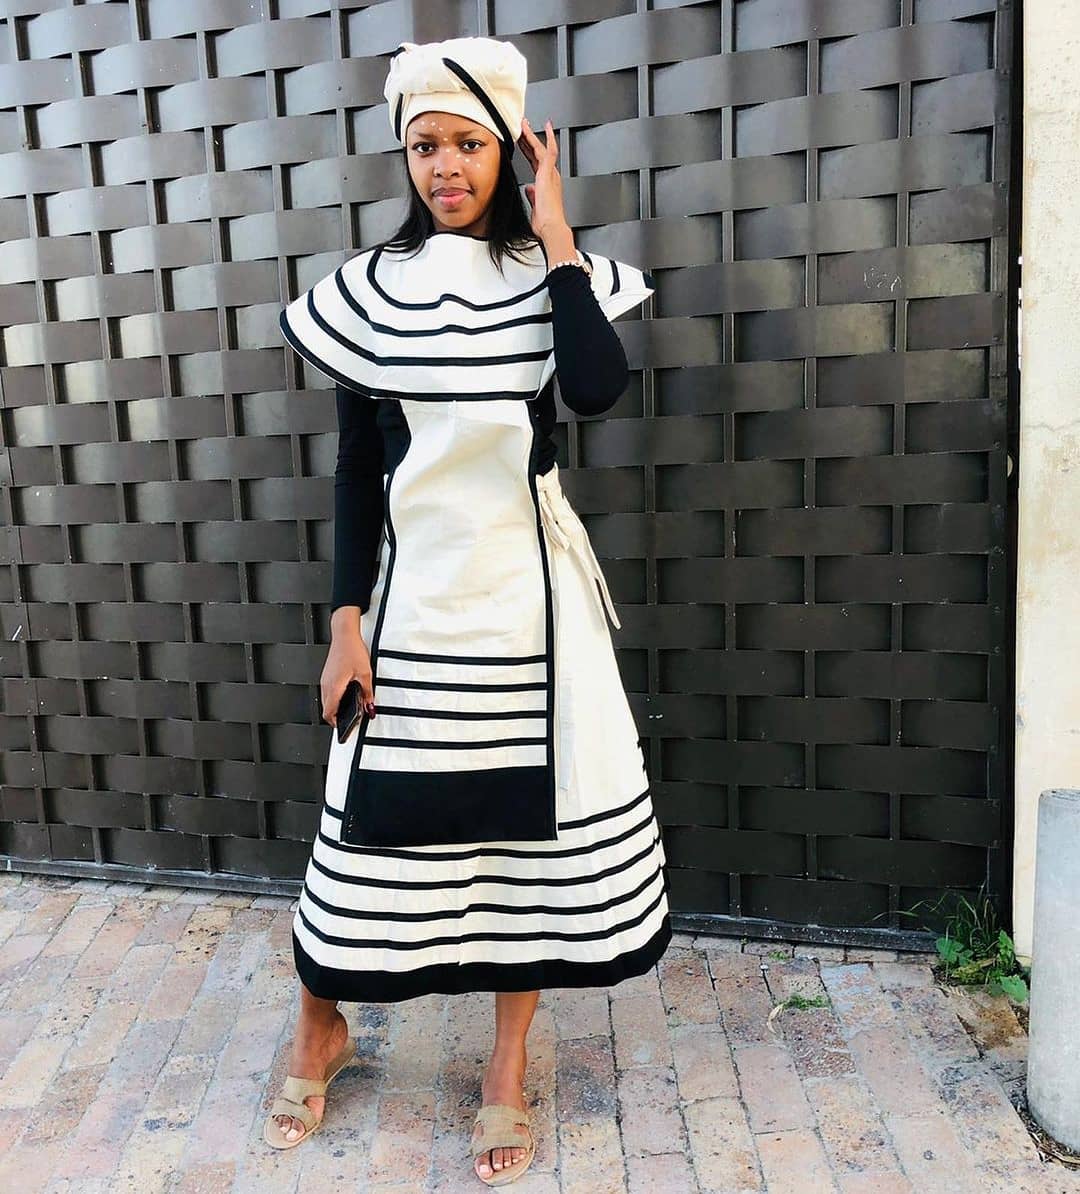 Amazing Xhosa Clothing For African Women - Dresses Designs 2